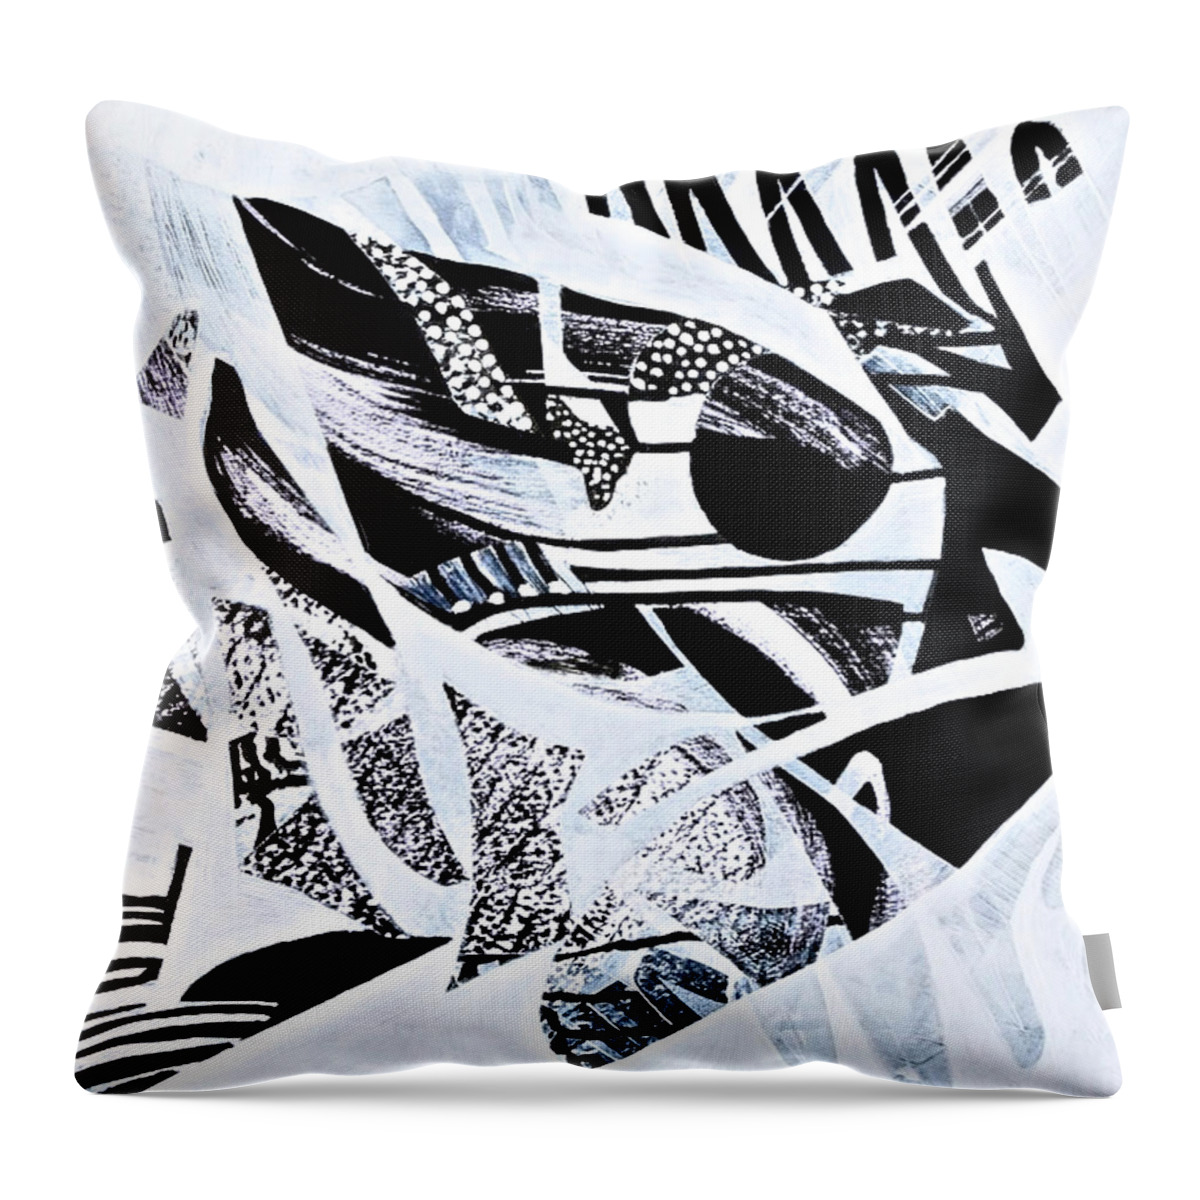  Throw Pillow featuring the painting Moonlit Sonata by Polly Castor